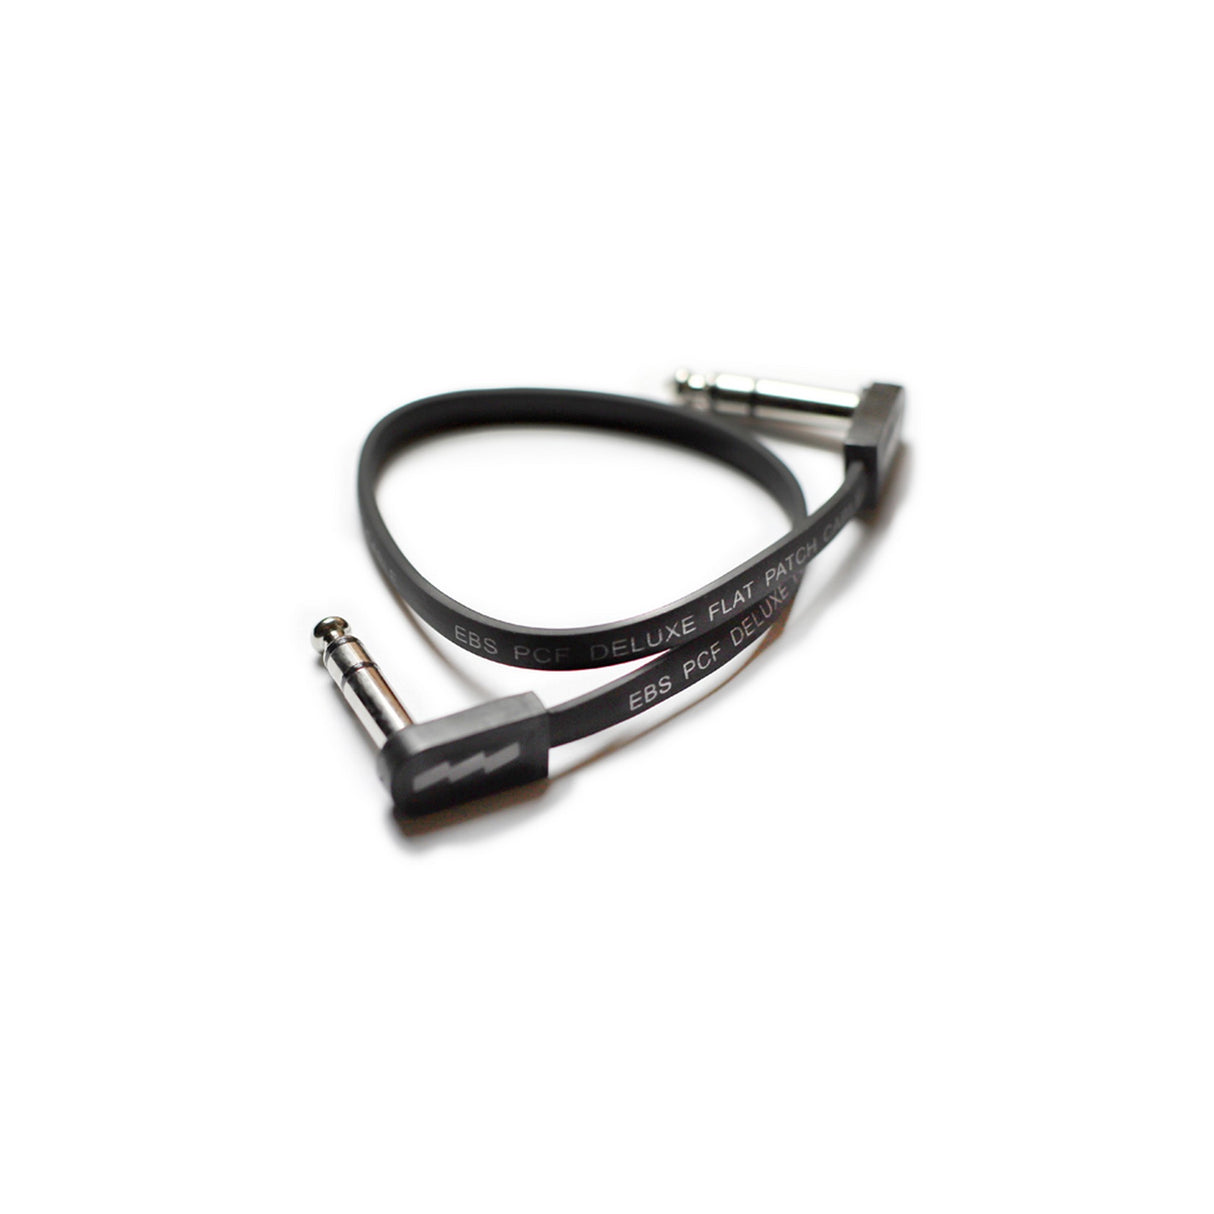 EBS PCF-DLS58 Flat Patch Cable with TRS Stereo Ends, 58cm